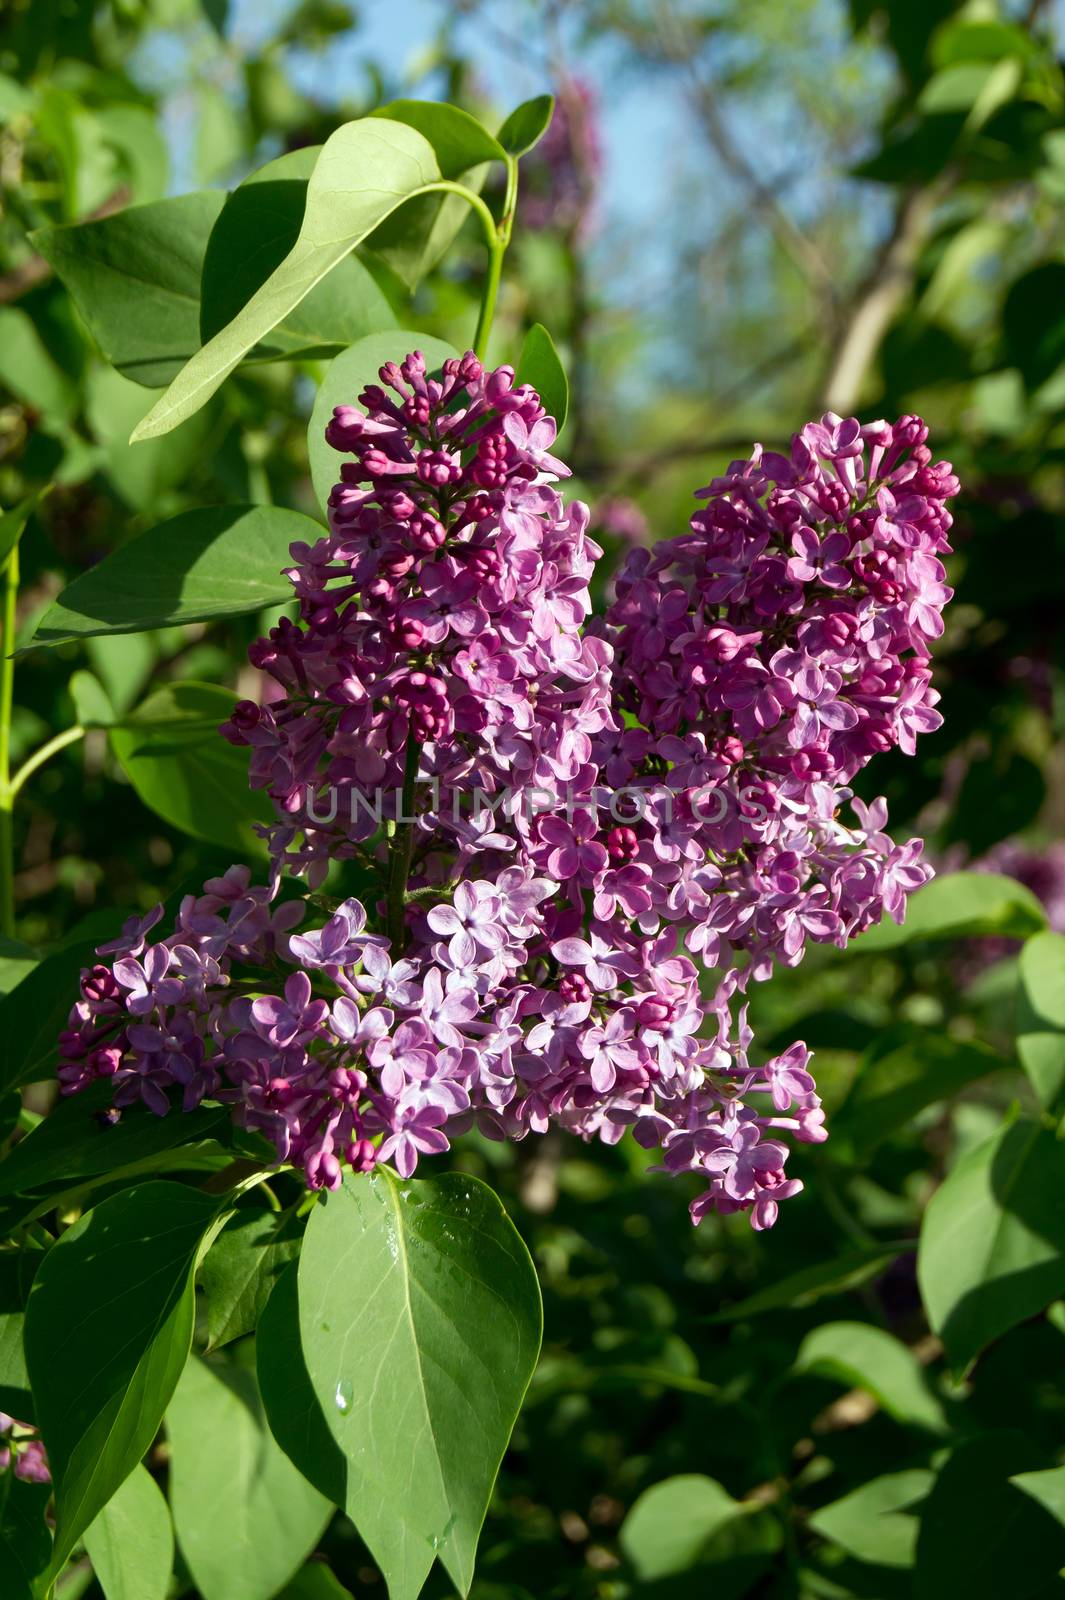 The purple lilac flower blooms in the gardens.